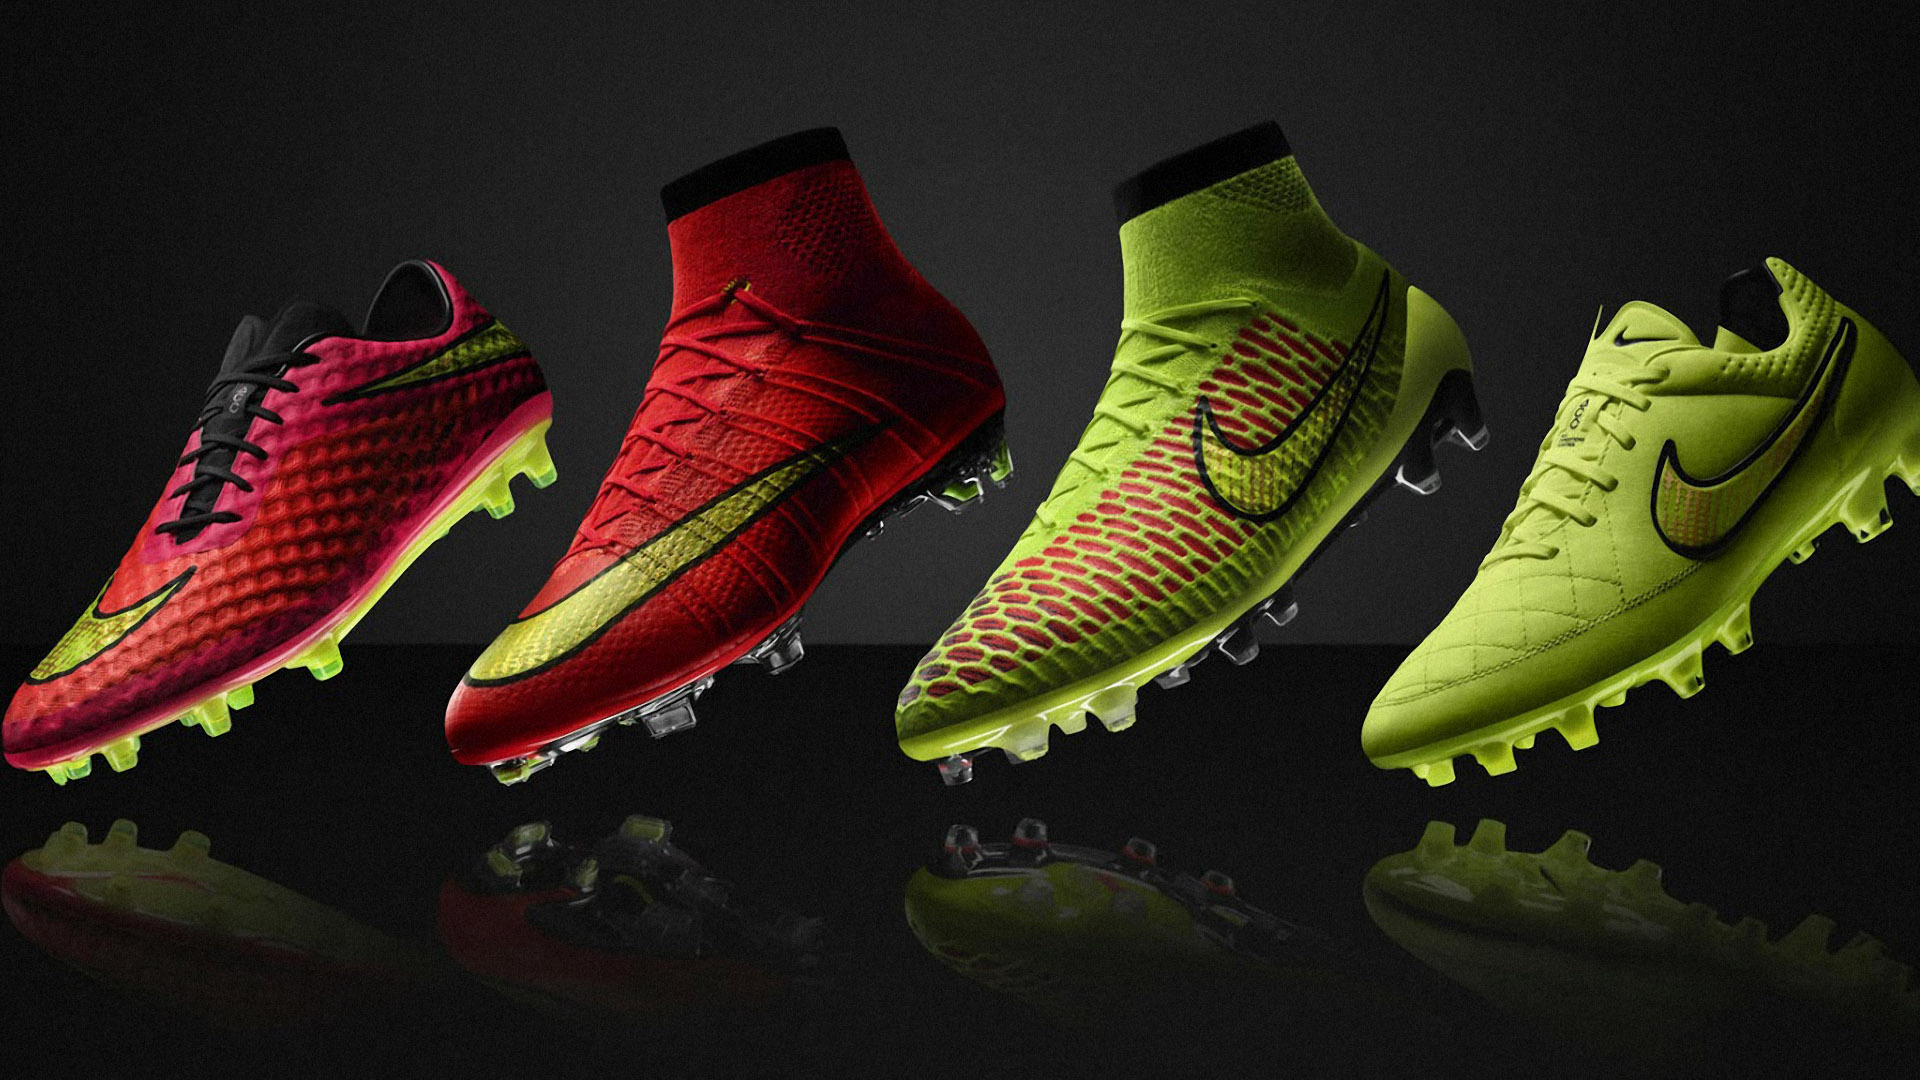 Nike Summer 2014 Football Boots Exclusive HD Wallpapers 7232 1920x1080